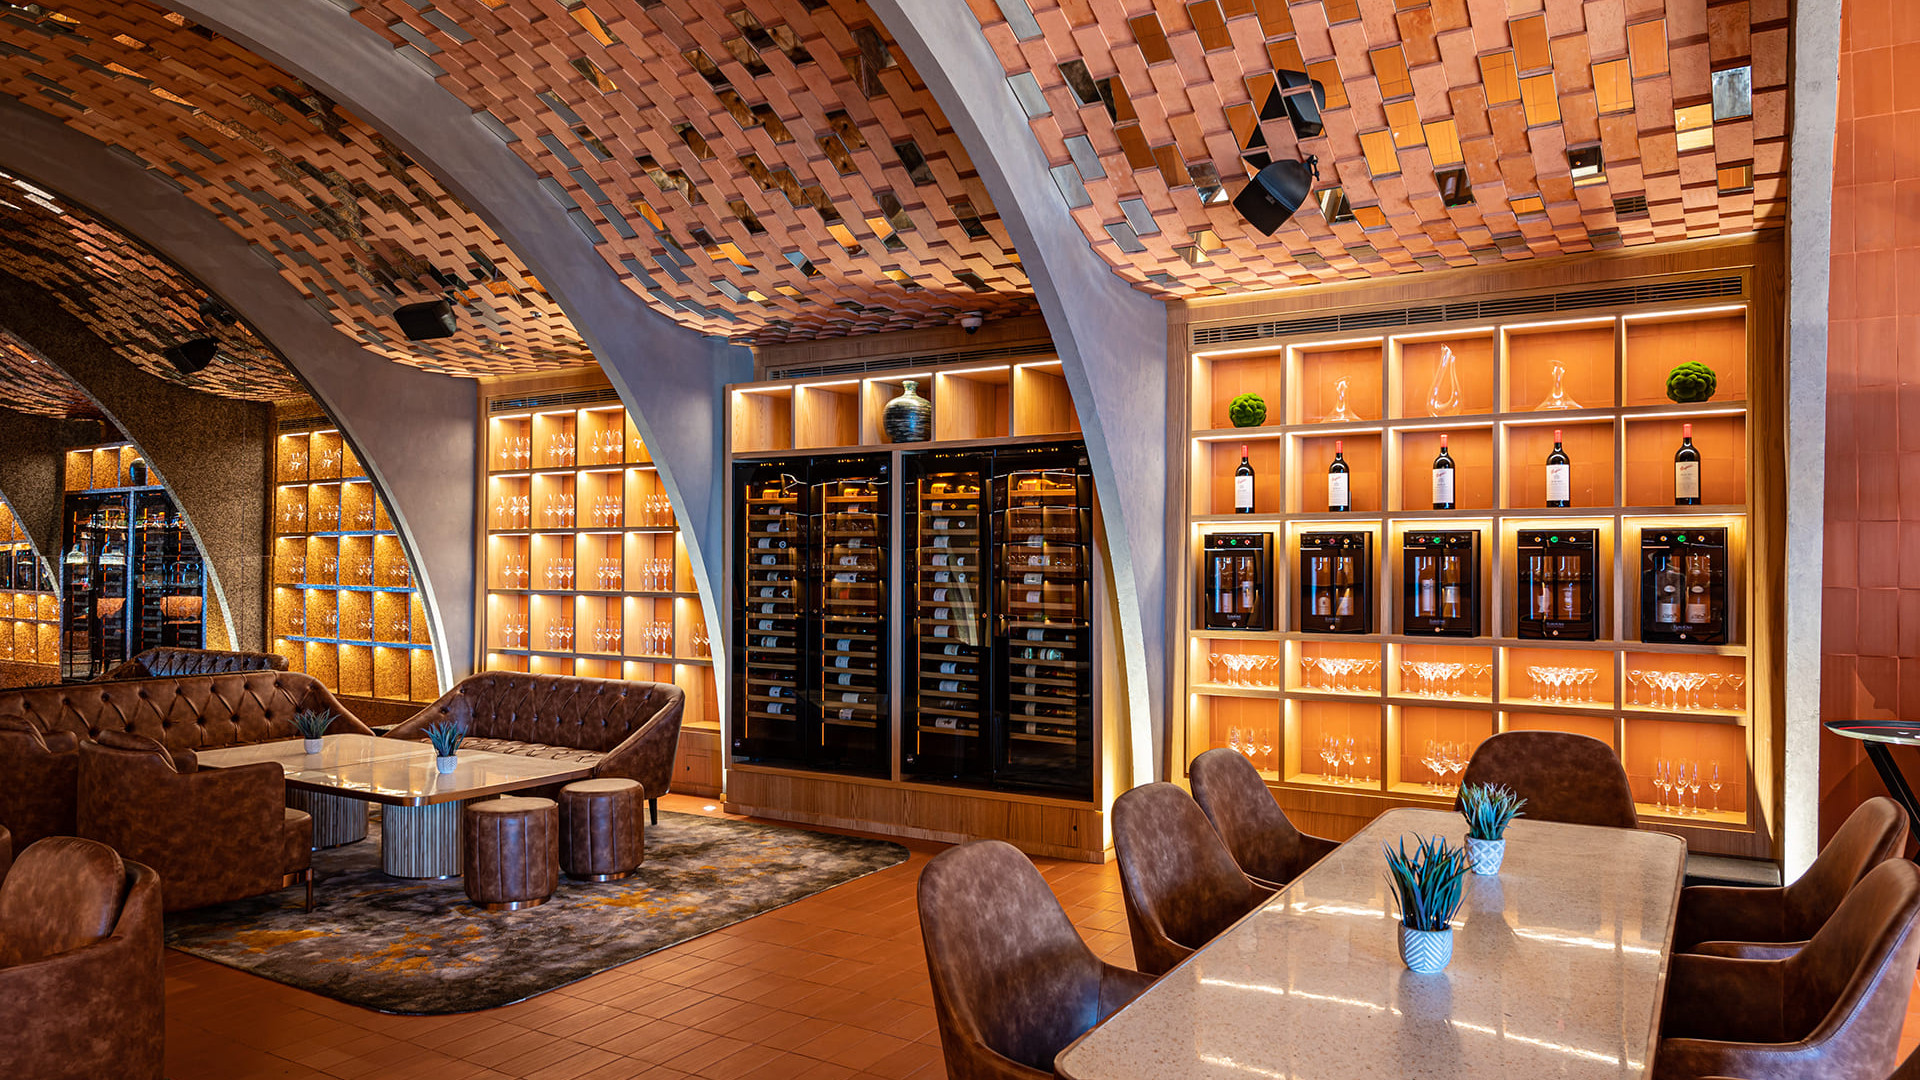 Wine scenography in architect and interior designer projects. Layout solutions for highlighting the wine offering in establishments such as restaurants, hotels, wine bars or layouts in wine merchants.